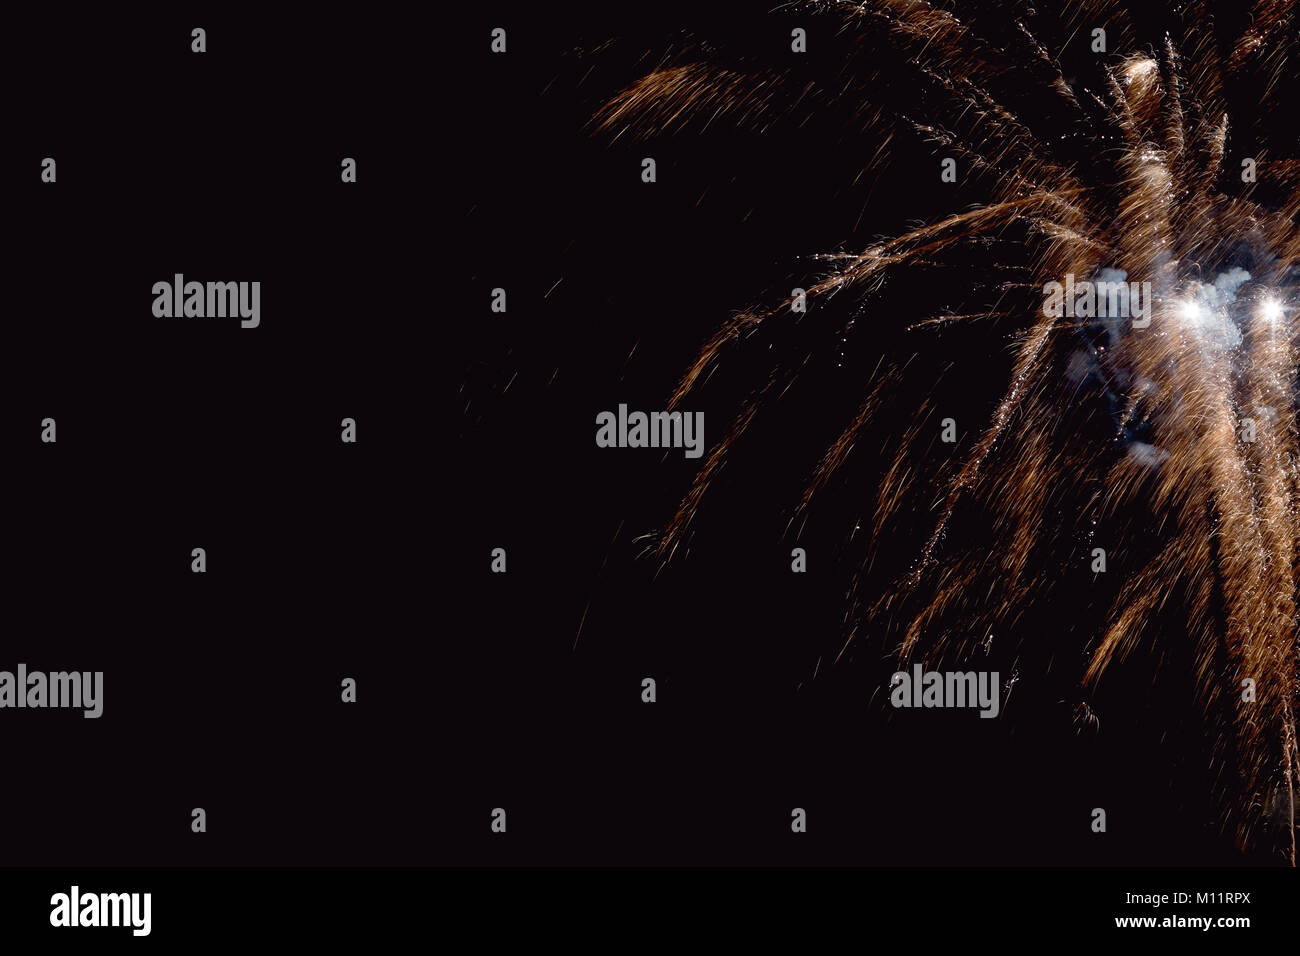 Colorful firework on the night sky. New Year celebration fireworks. Abstract firework isolated on black background with free space for text Stock Photo